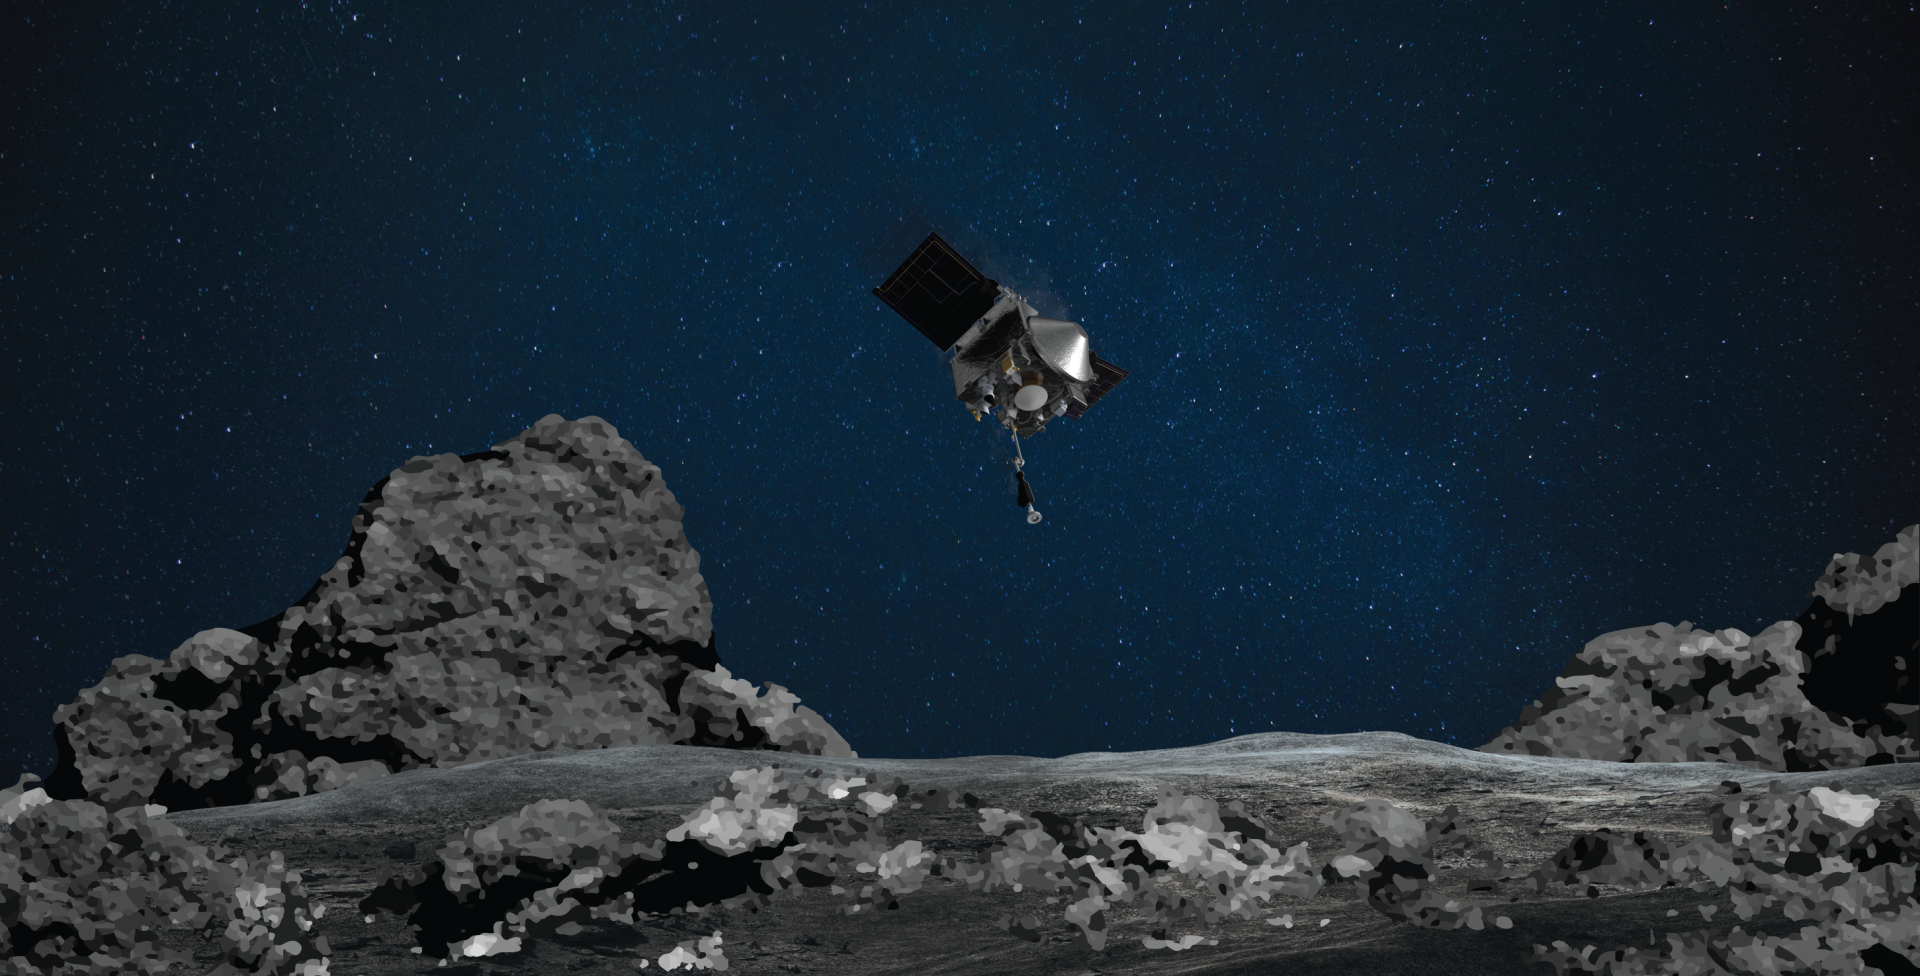 NASA's OSIRIS-REx is ready for touchdown on asteroid Bennu. On Aug. 11, the mission will perform its “Matchpoint” rehearsal – the second practice run of the Touch-and-Go (TAG) sample collection event. The rehearsal will be similar to the Apr. 14 “Checkpoint” rehearsal, which practiced the first two maneuvers of the descent, but this time the spacecraft will add a third maneuver, called the Matchpoint burn, and fly even closer to sample site Nightingale – reaching an altitude of approximately 131 ft (40 m) – before backing away from the asteroid.

This artist's rendering shows OSIRIS-REx spacecraft descending towards asteroid Bennu to collect a sample of the asteroid’s surface. (Aug 10, 2020)